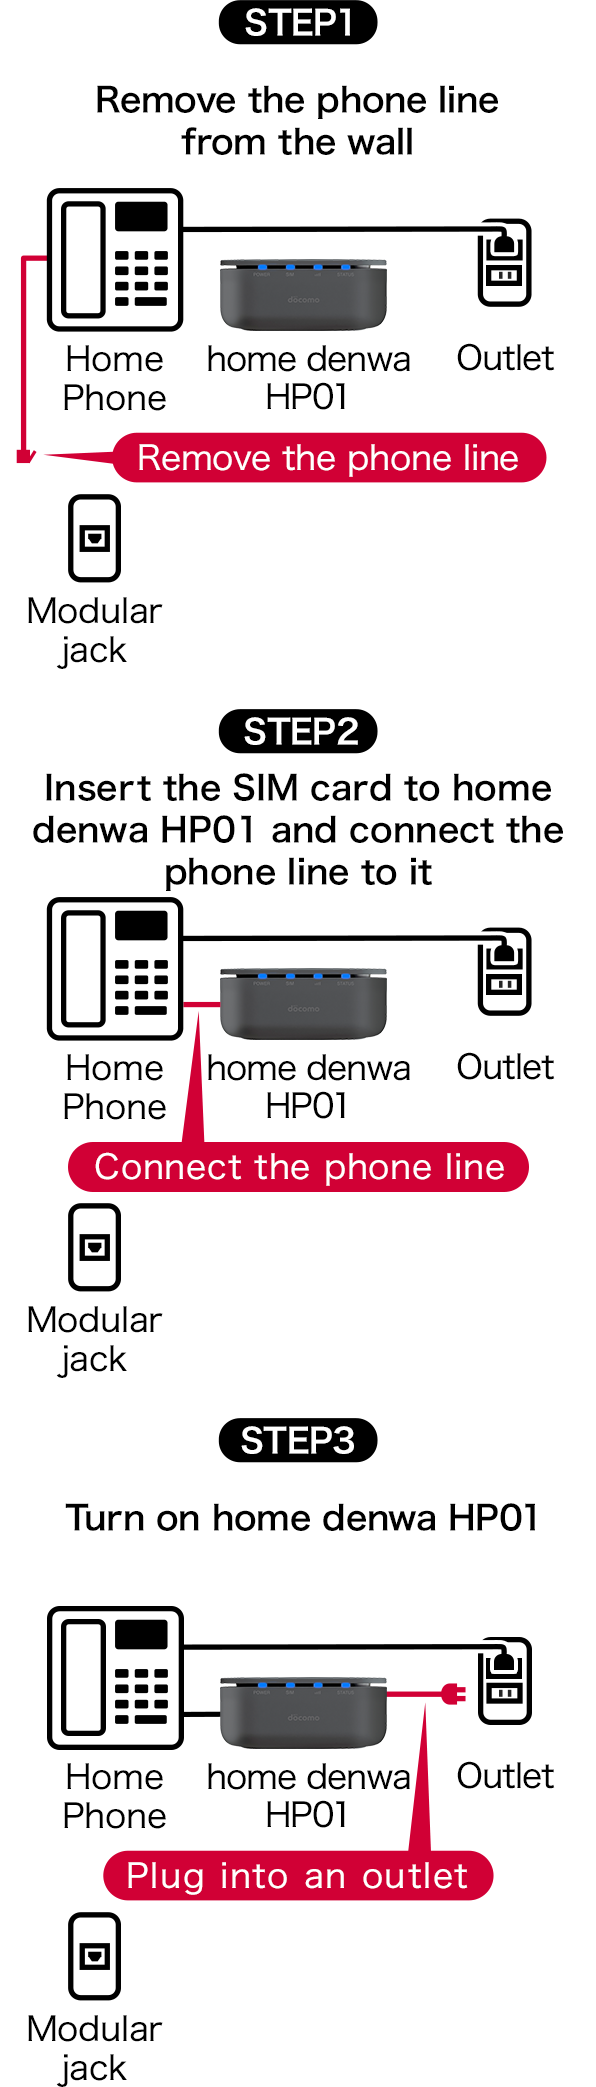 STEP1 Remove the phone line from the wall, STEP 2 Insert the SIM card to home denwa HP01 and connect the phone line to it, STEP3  Turn on home denwa HP01